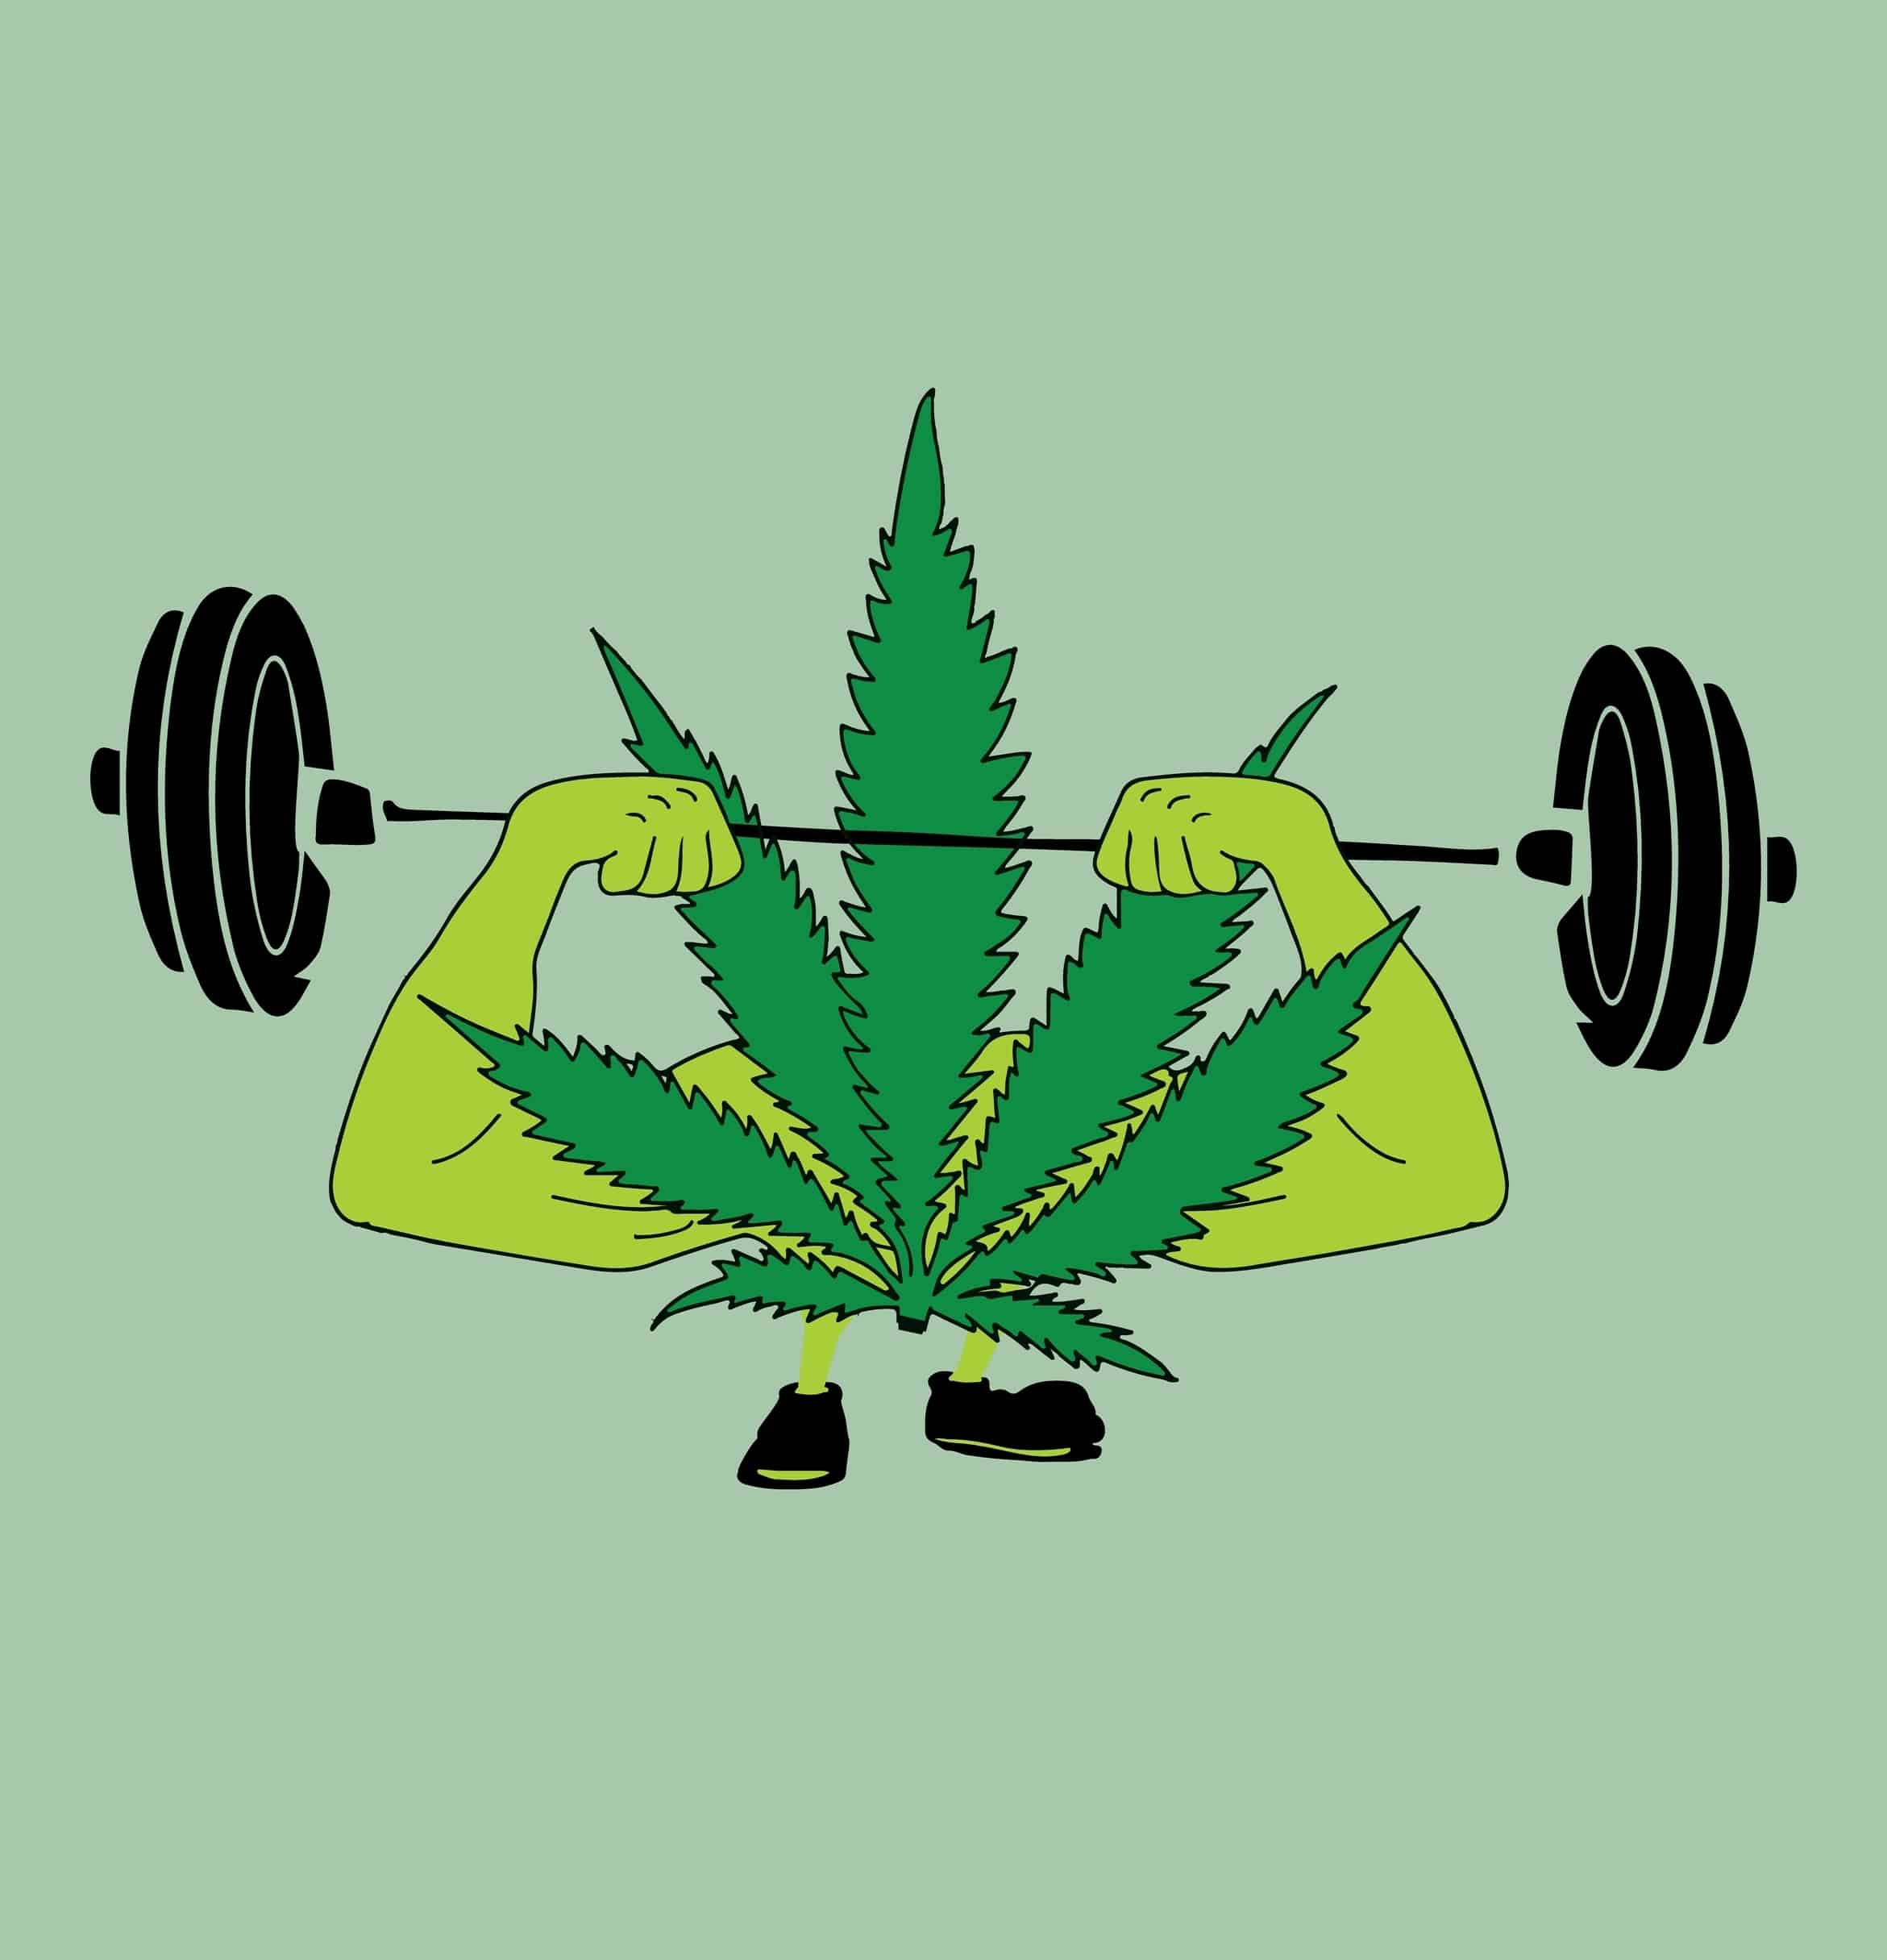 I’m an Average Dude in His Mid-30s. Can Weed Help Me at the Gym?